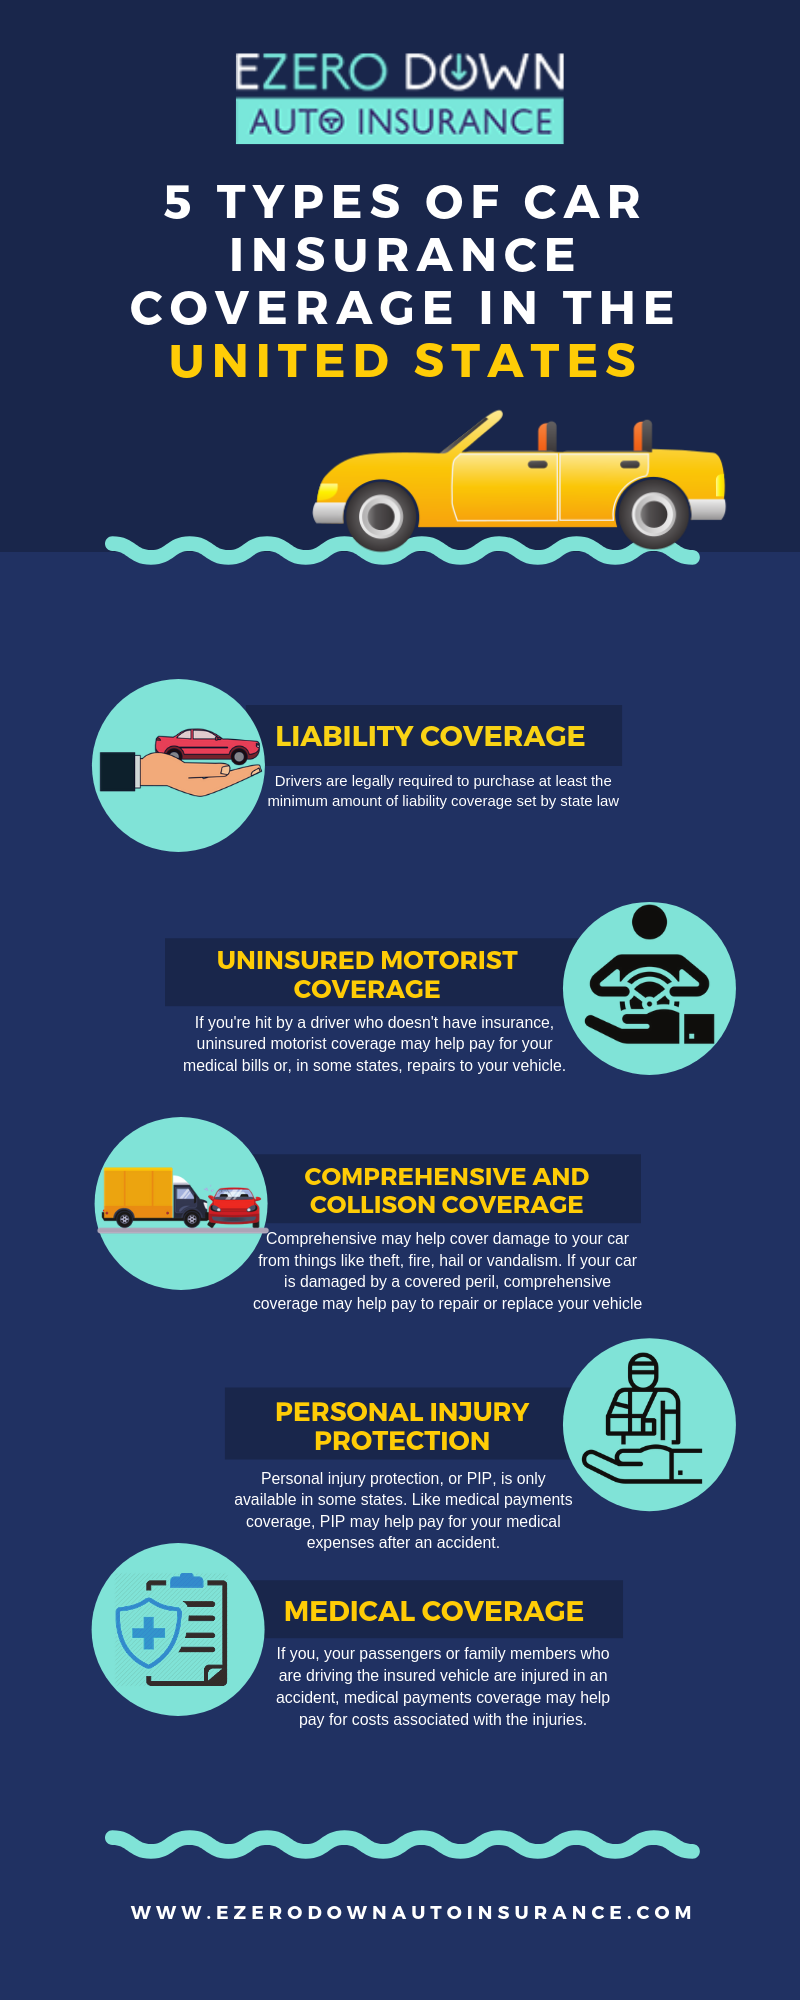 What are 4 main types of automobile coverage insurance?